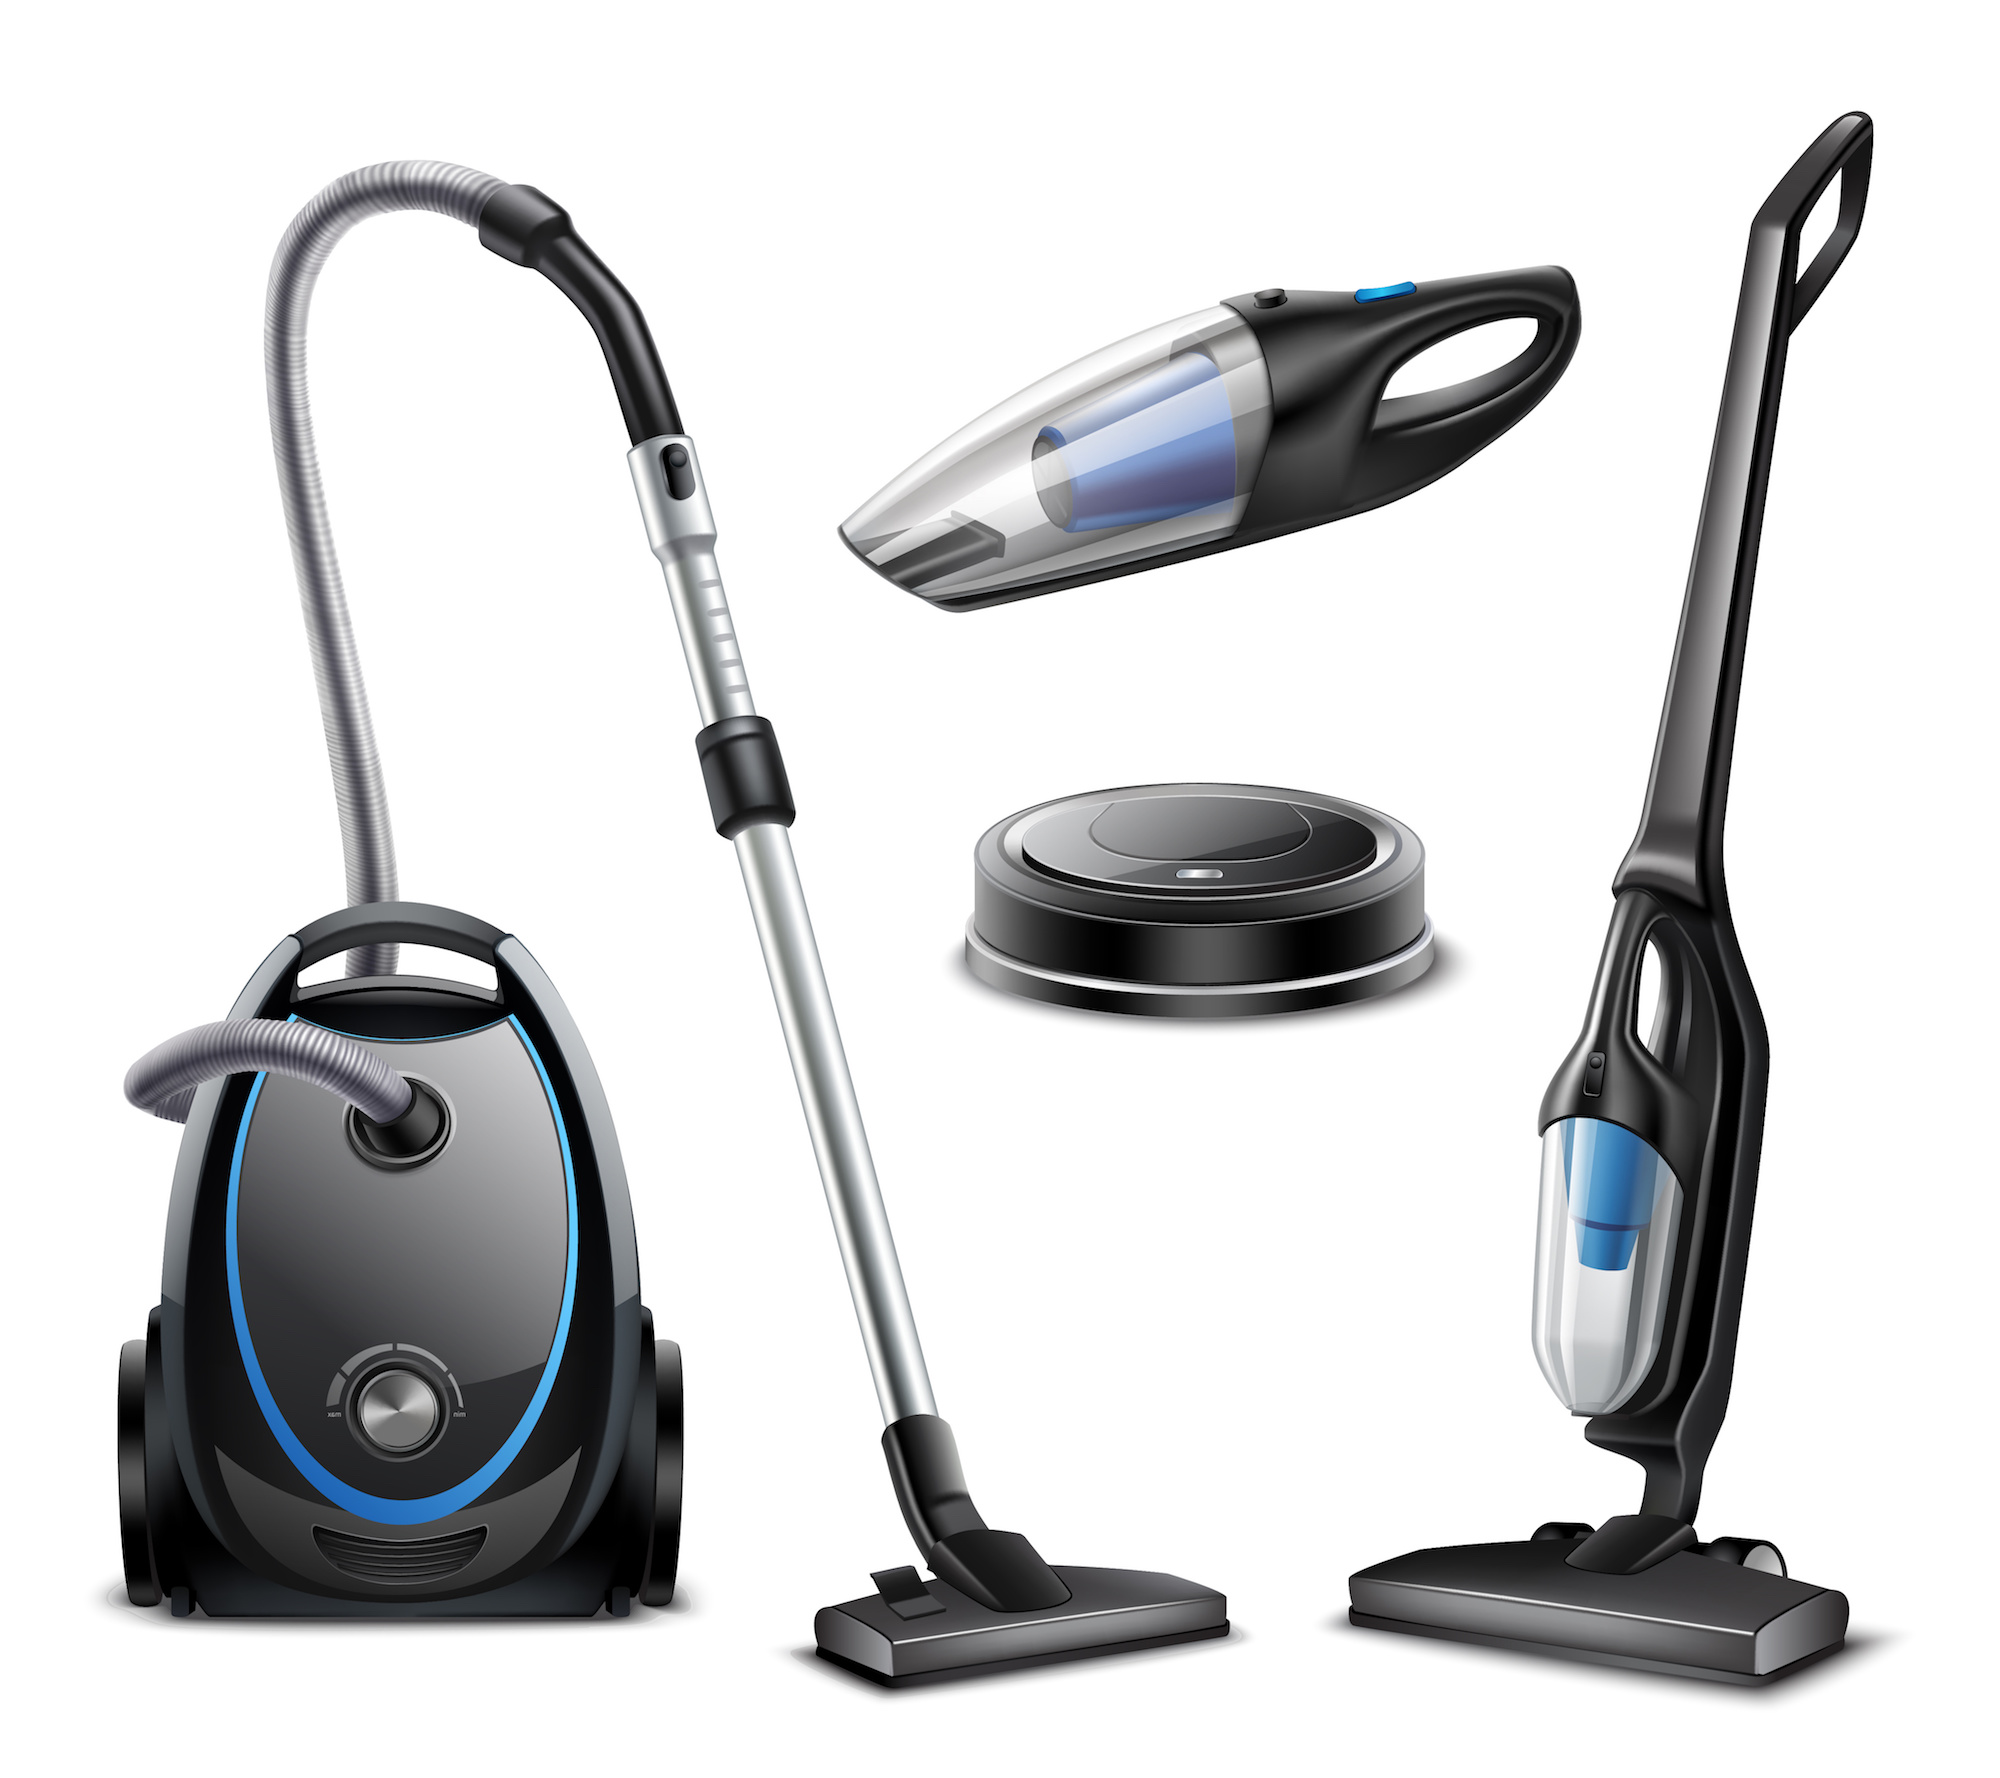 Image of multiple different types of vacuum cleaners.